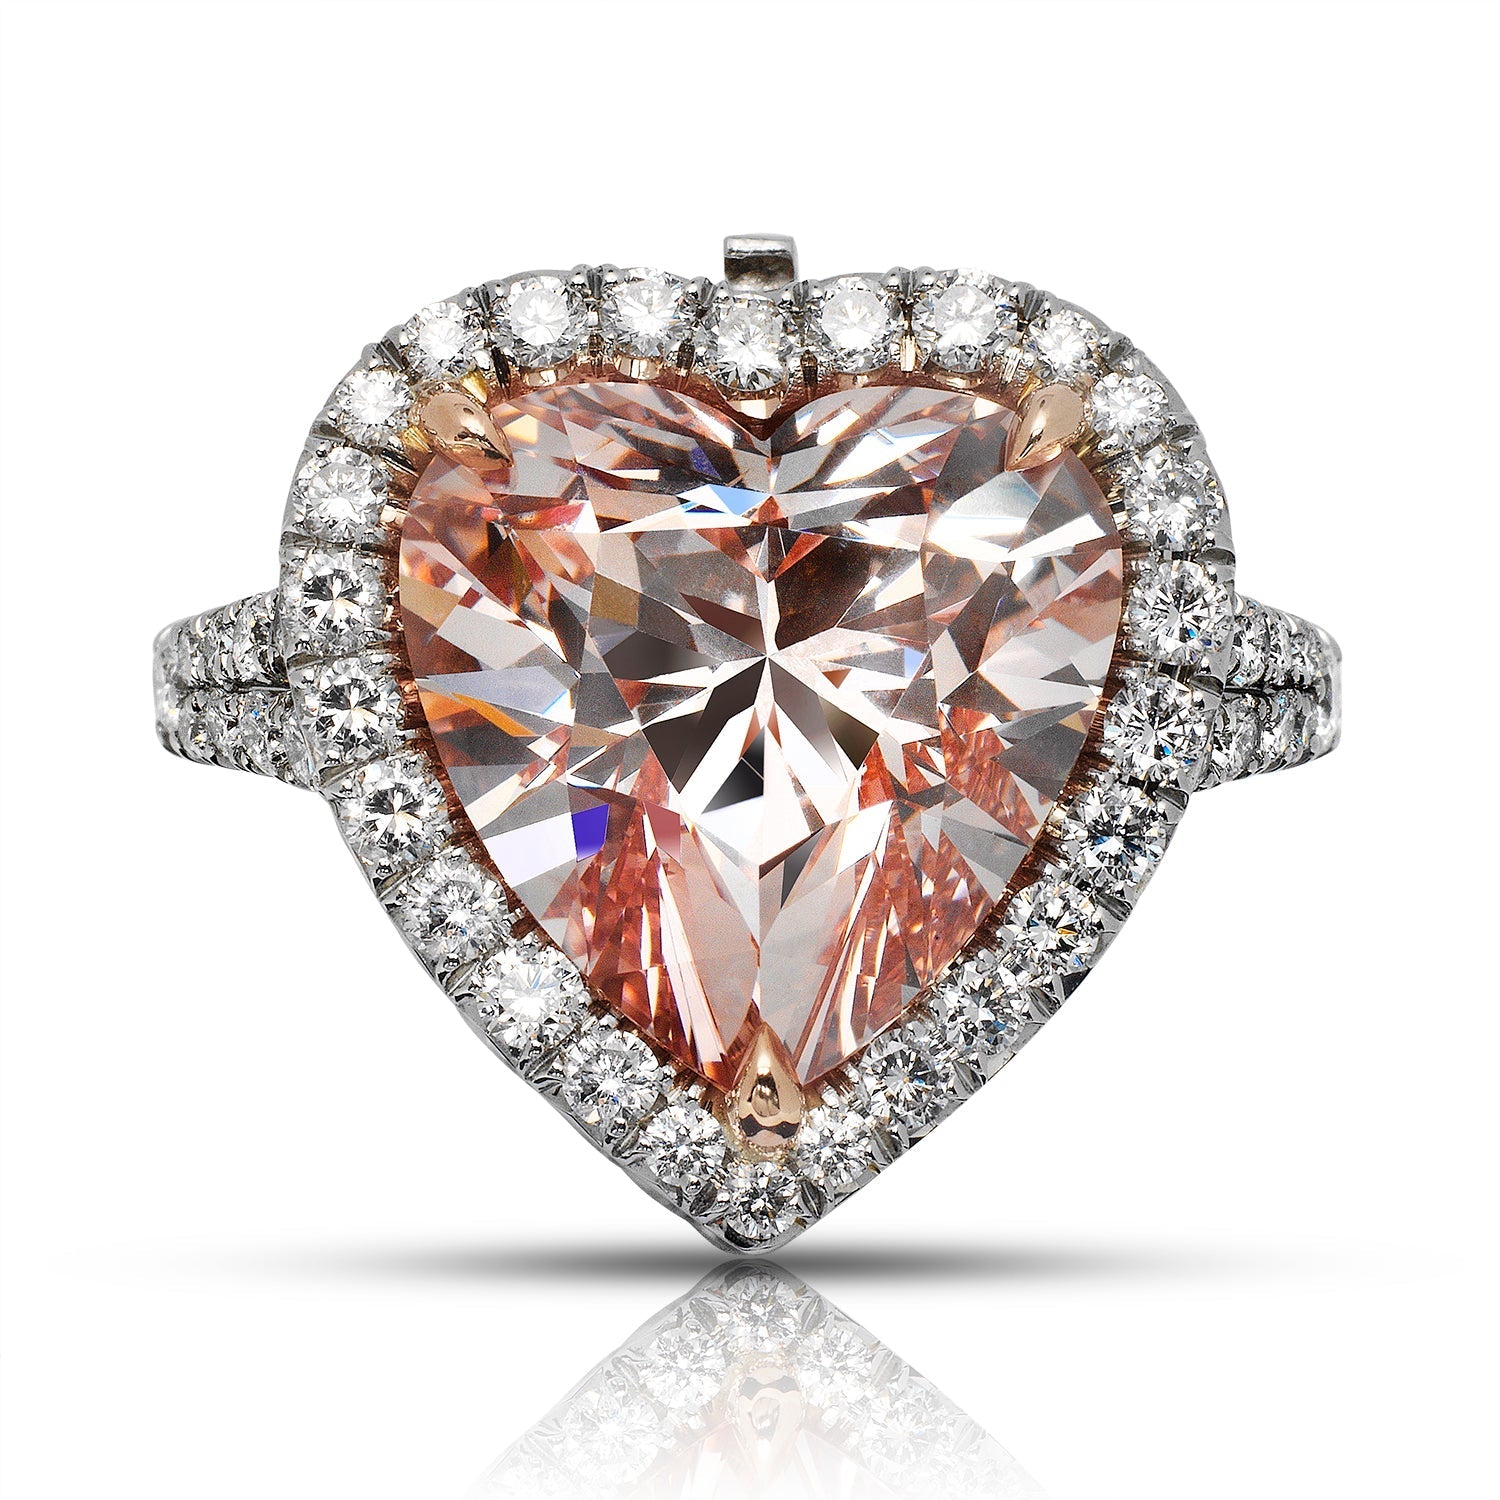 Fancy Pink Diamond Ring Heart-Shaped 6 Carat Halo Ring  in Platinum and 18K White Gold Front View